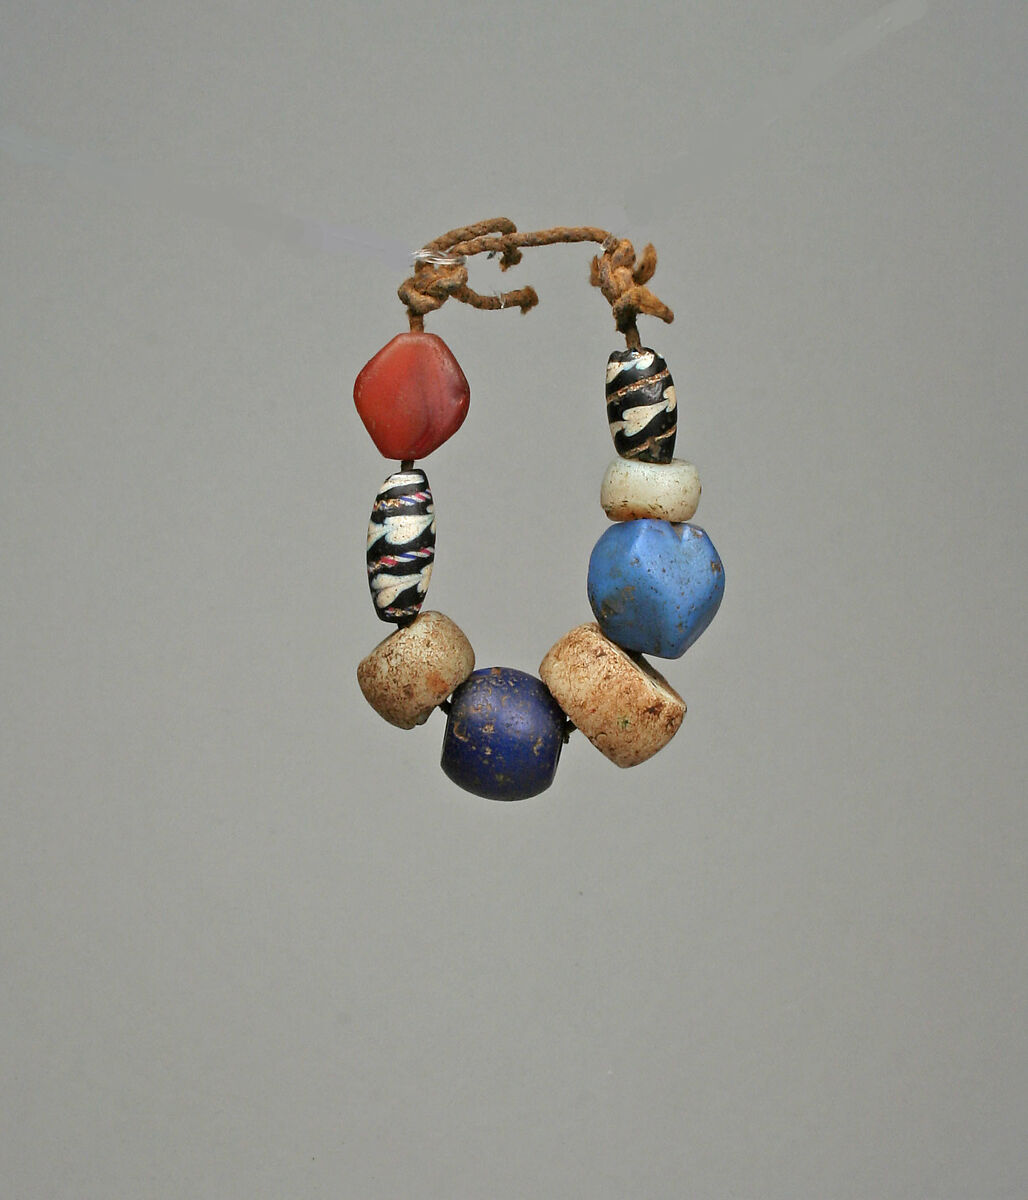 Bracelet, Stone and glass, textile or fiber string, Dogon peoples 